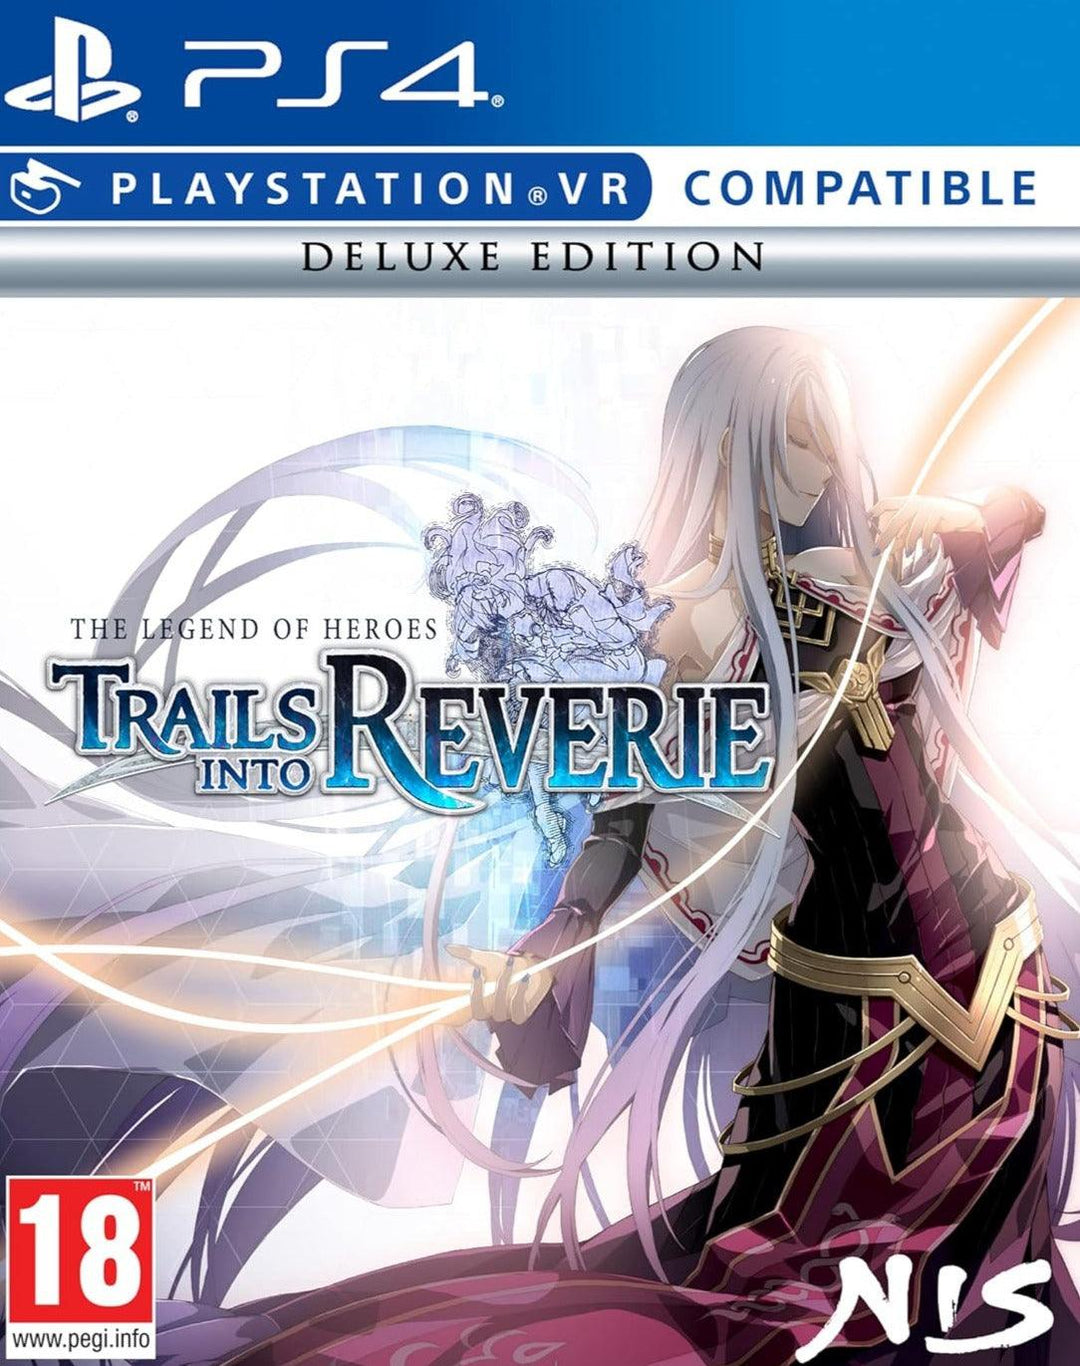 The Legend of Heroes Trails Into Reverie (Deluxe Edition)/ PS4 / Playstation 4 - GD Games 